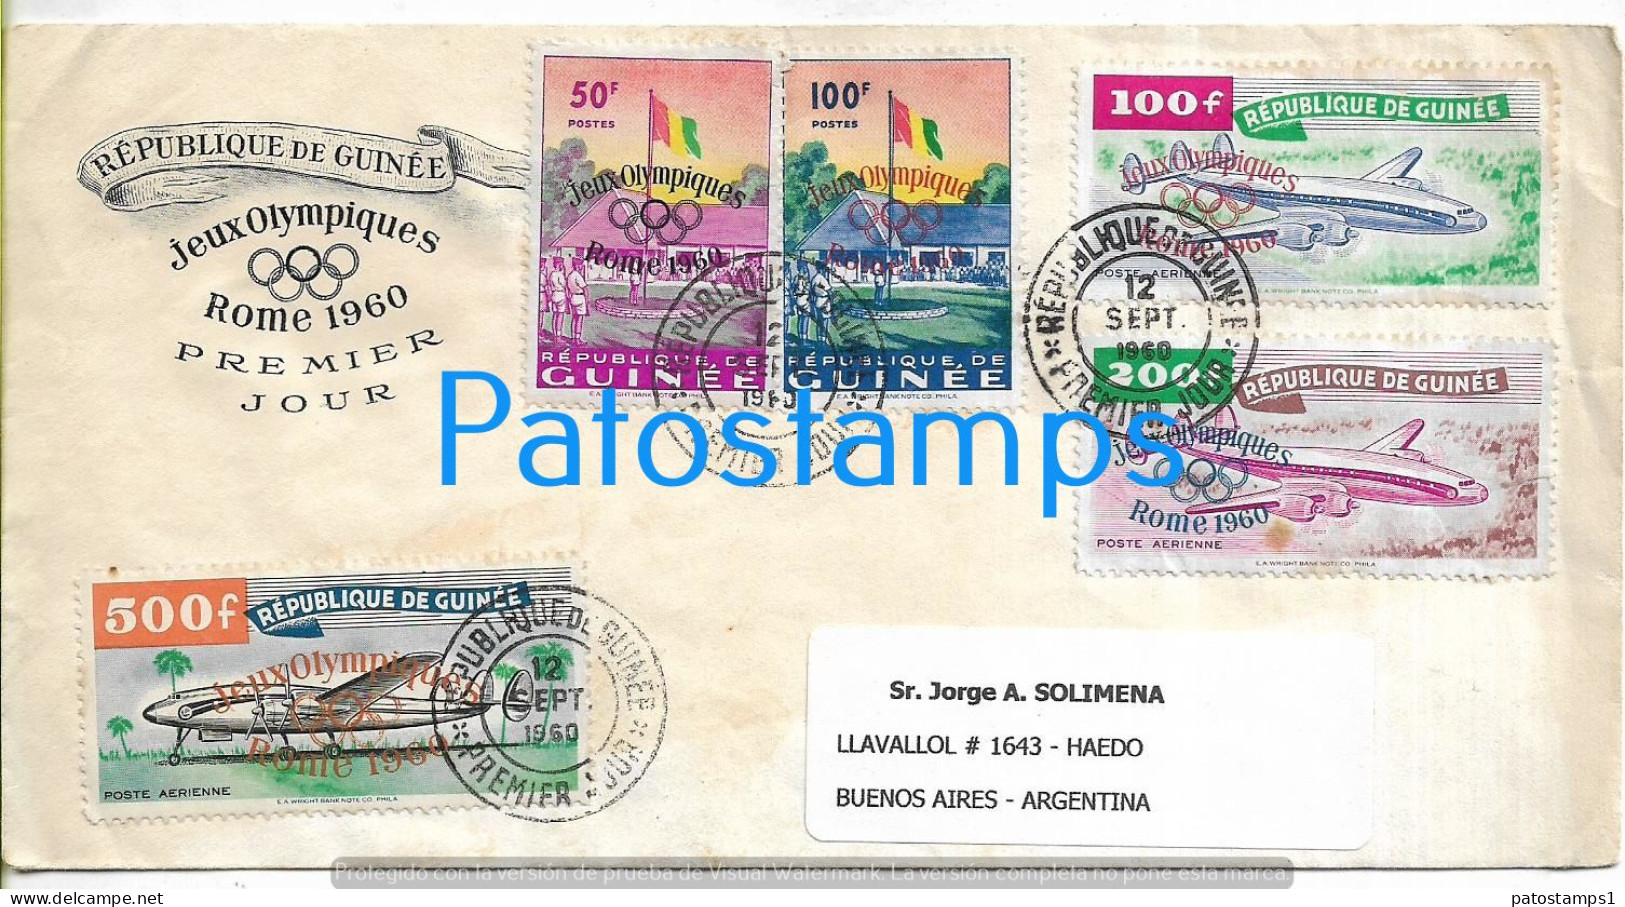 226331 AFRICA REPUBLIC GUINEE COVER CANCEL YEAR 1960 OLYMPIC GAMES CIRCULATED TO ARGENTINA NO POSTCARD - Sonstige - Afrika